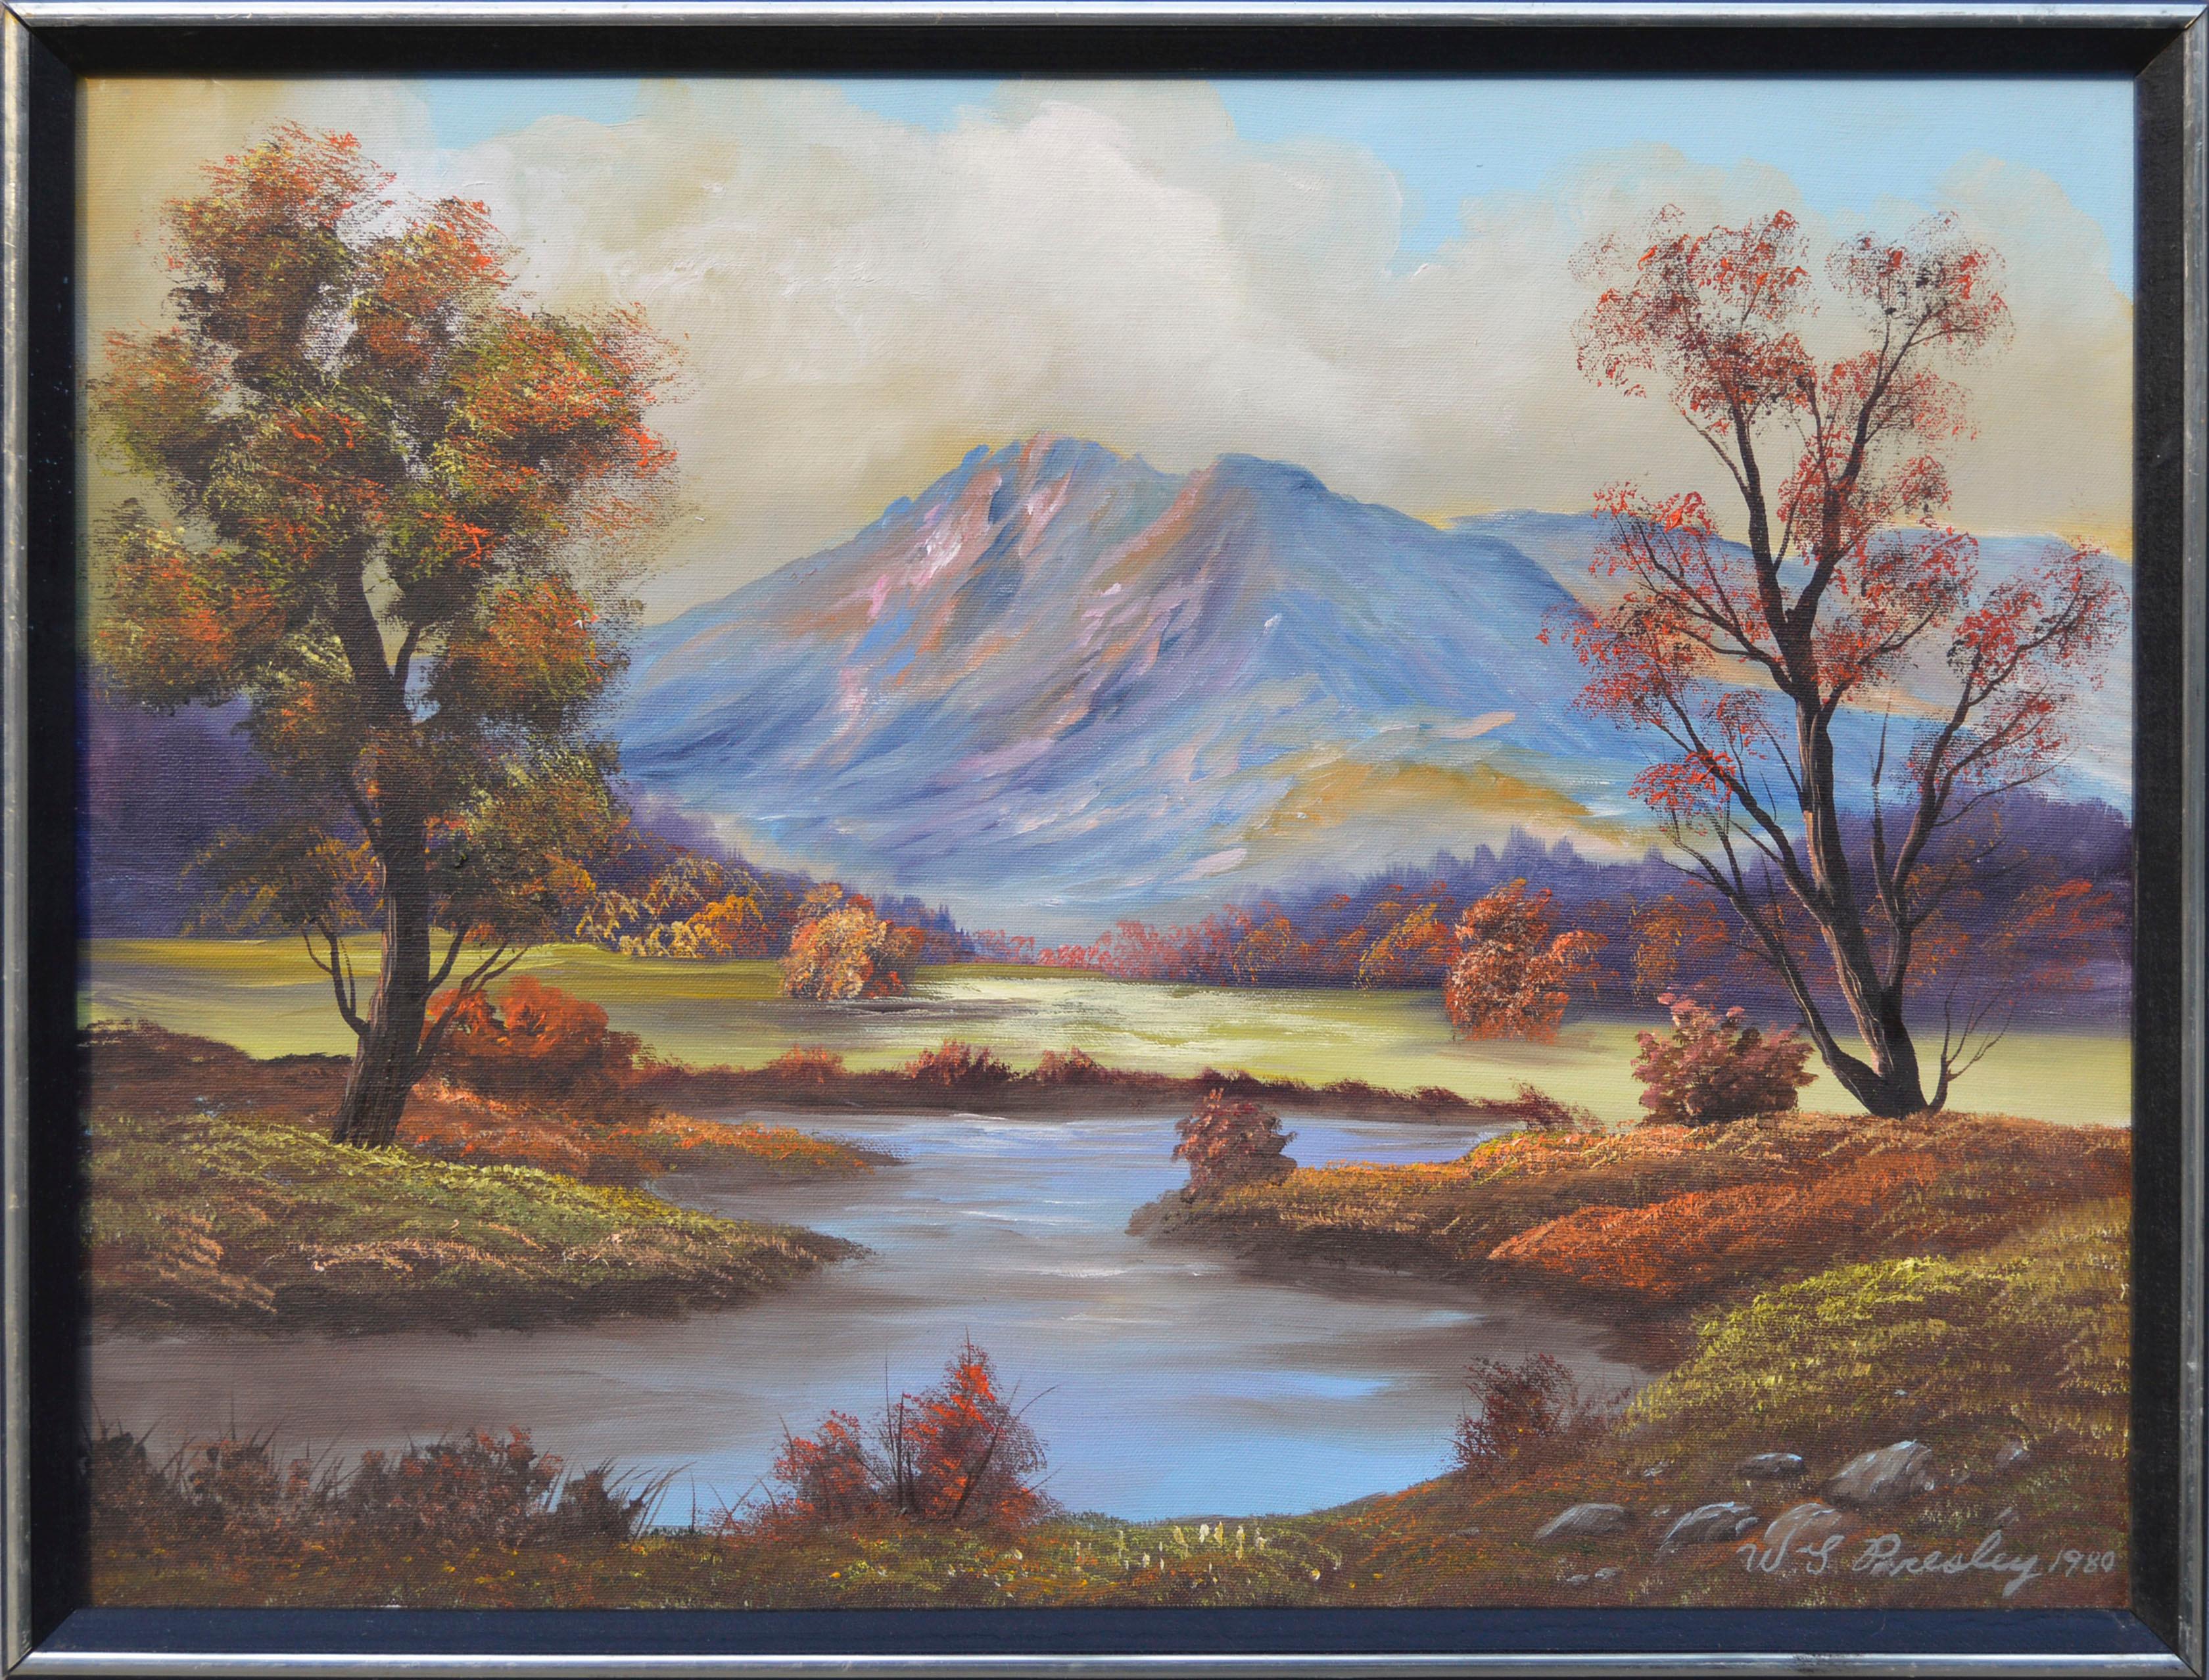 W. T. Presley Landscape Painting - Vintage Landscape Mountain and Pond in Autumn